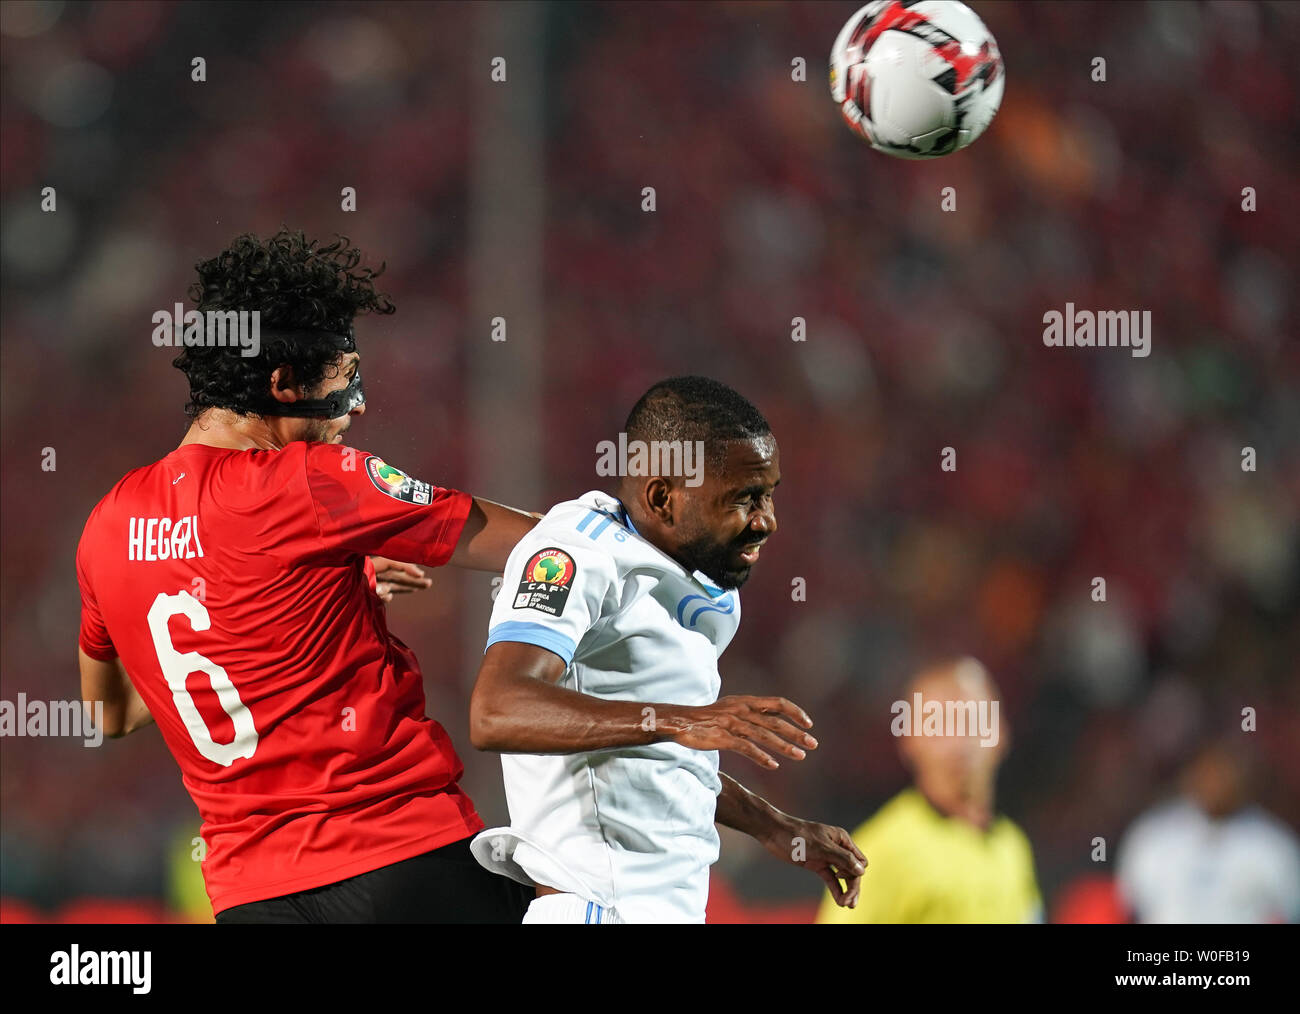 Ahmed Elsayed Elsayed Ali Elsayed Hegazy of Egypt and Cedric Bakambu of Rd Congo challenging for the ball during the 2019 African Cup of Nations match between Egypt and DR Congo at the Cairo International Stadium in Cairo, Egypt on June 26, 2019. Stock Photo